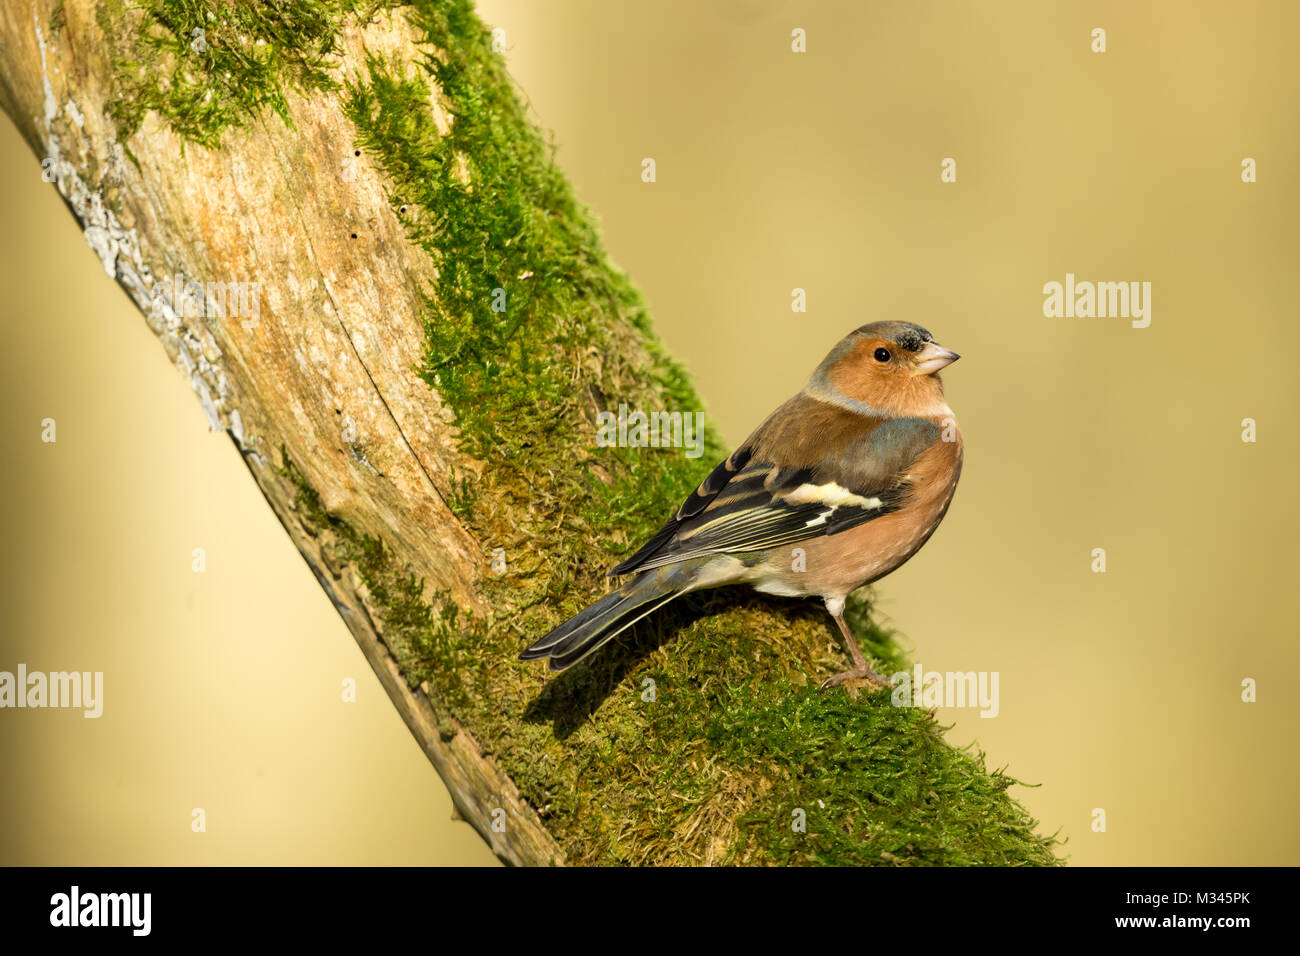 Male Chaffinch on green, moss covered log with blurred background Stock Photo